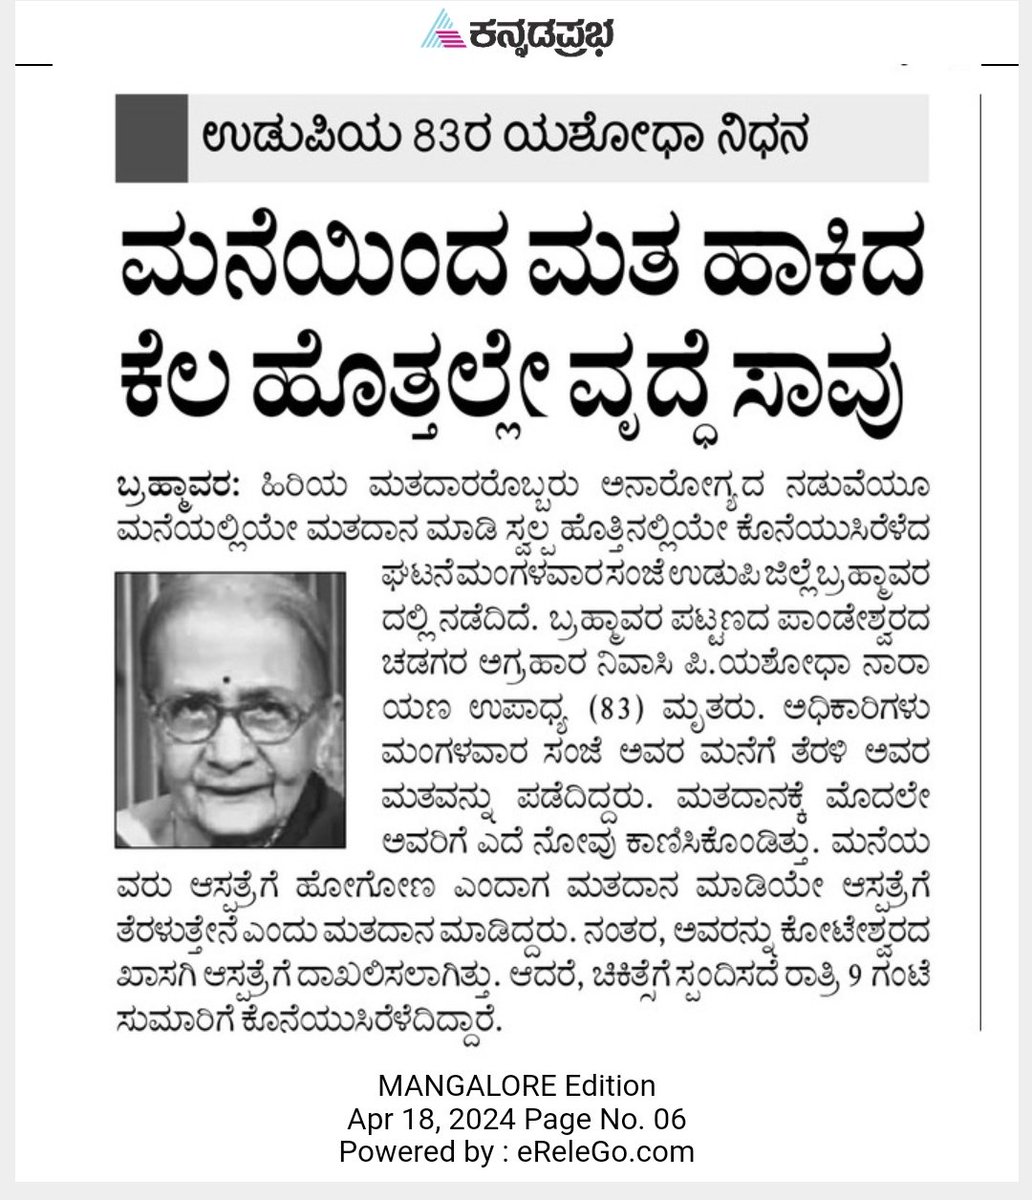 83 year old Yashoda from Brahmavara Karnataka votes from home, and dies the same day night. Seems she insisted that she should vote first, despite having chest pain. ...Om Shanti 🙏